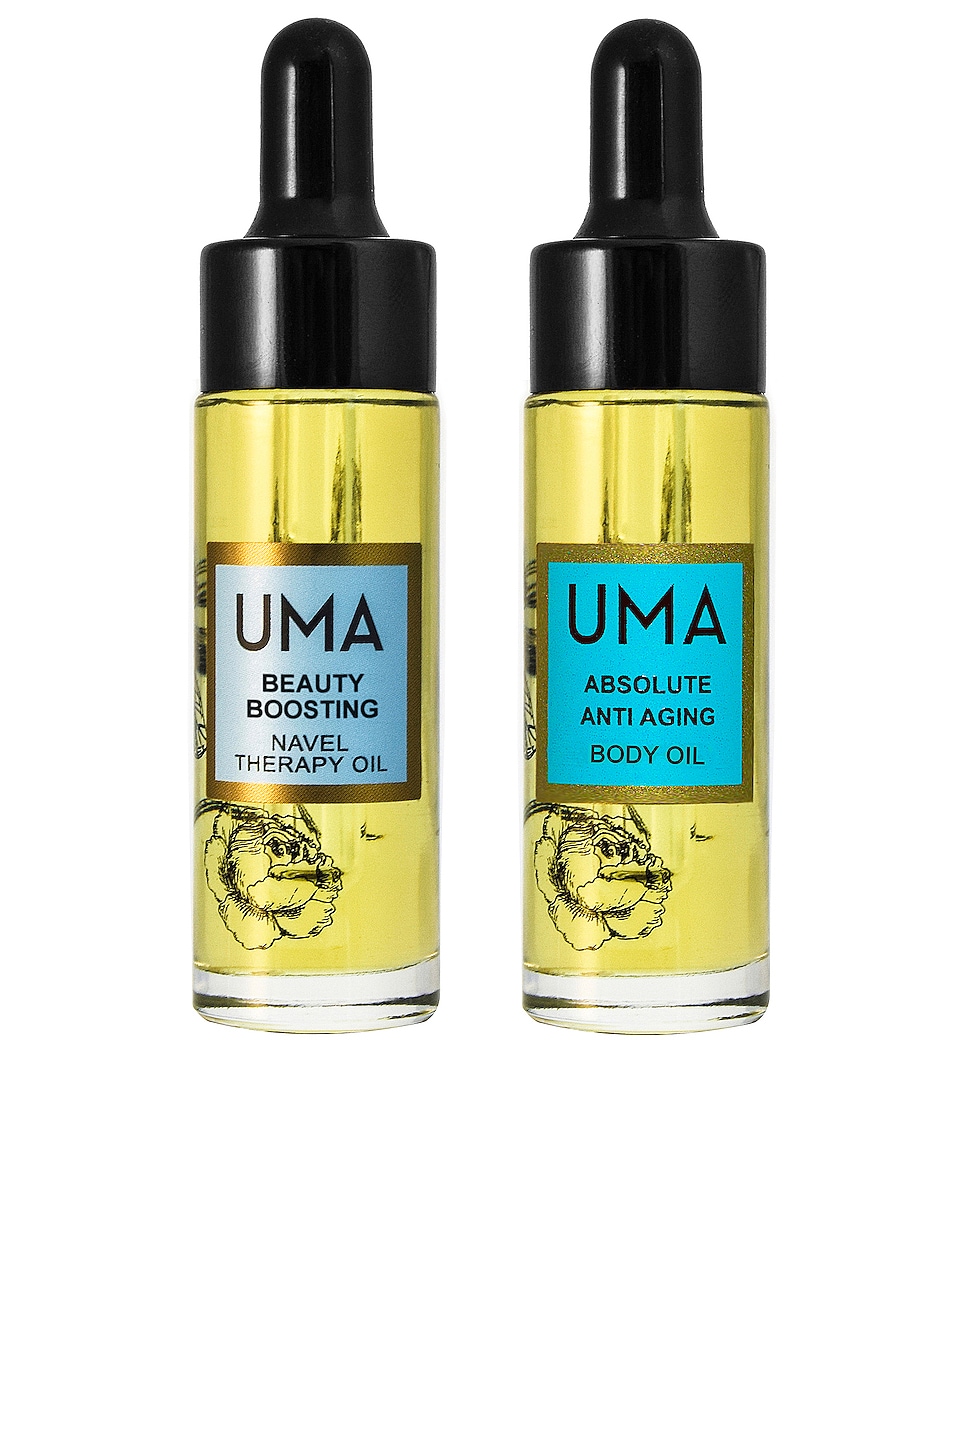 Uma Beauty Boosting Navel Therapy Oil Set In N,a